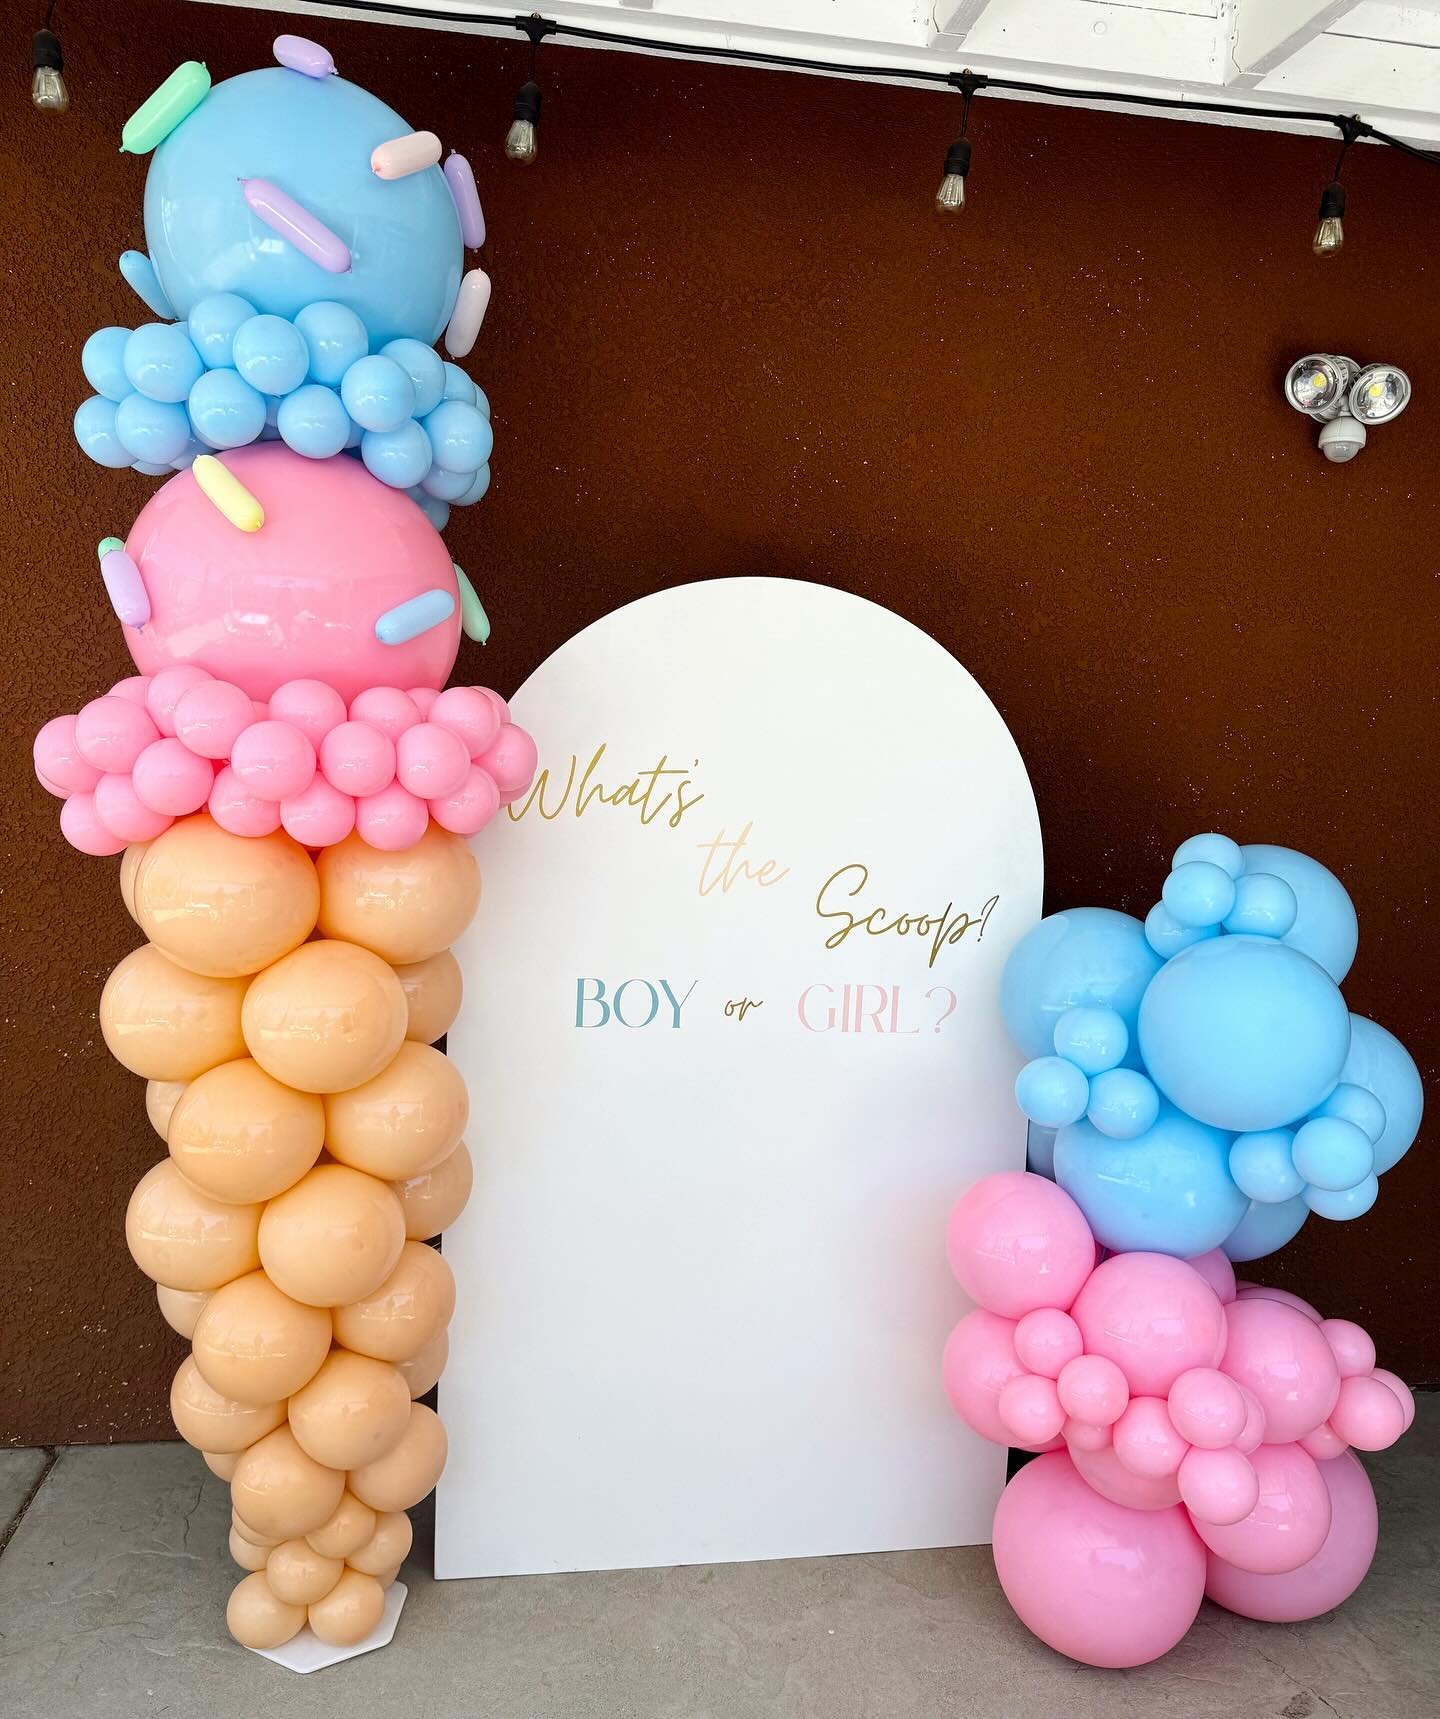 What&rsquo;s the scoop gender reveal set up! 🤍🍦 
From small intimate parties to over the top events we&rsquo;ve got you covered to make your bash pop! ✨

#bashdrop #genderrevealparty #temeculaballoonstyling #balloongarland #balloonstyling #icecream